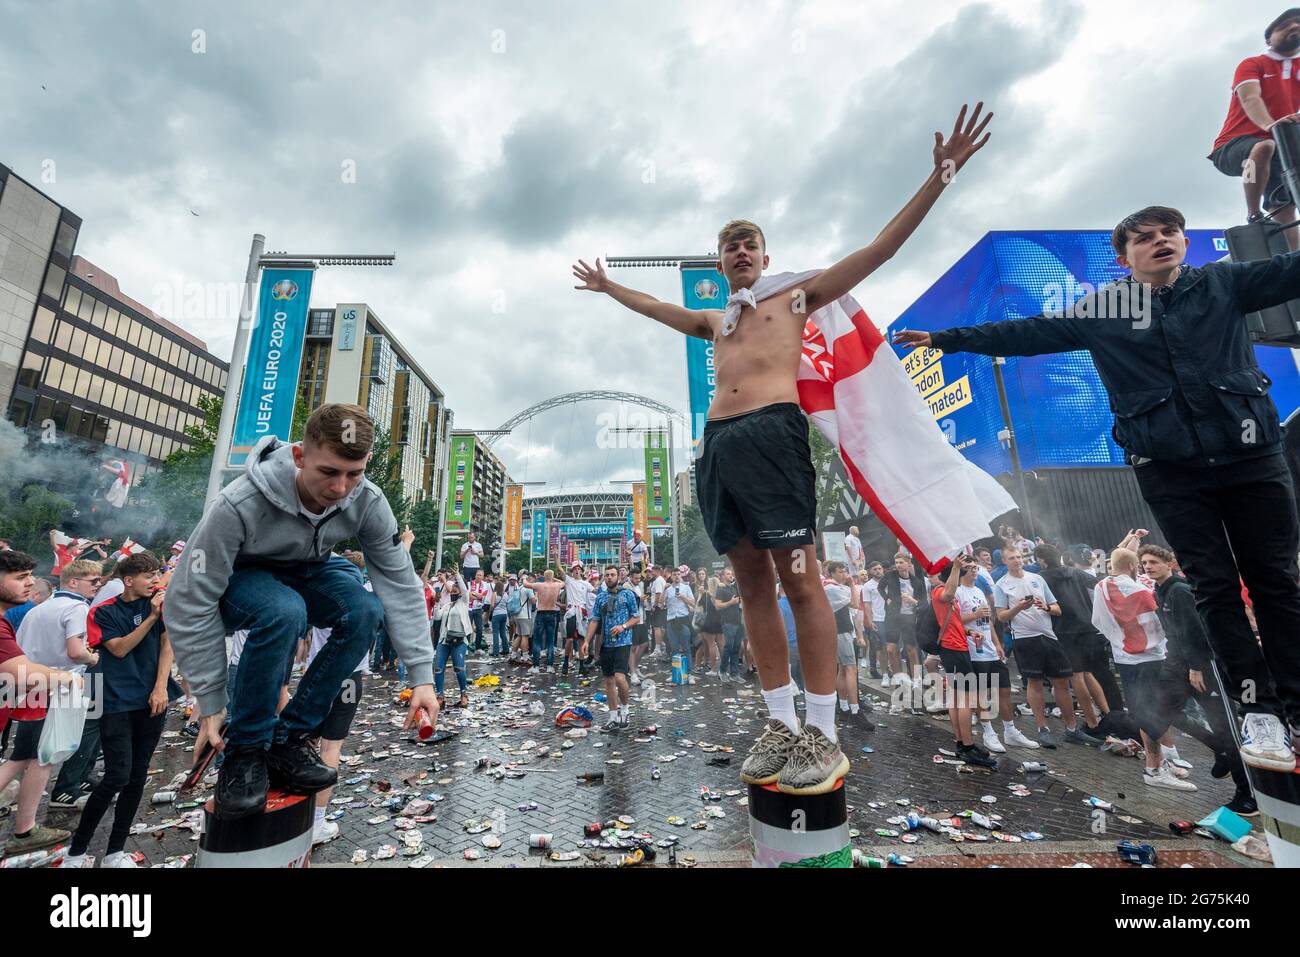 London, UK.  11 July 2021.  England fans outside Wembley Stadium ahead of the final of Euro 2020 between Italy and England.  It is the first major final that England will have played in since winning the World Cup in 1966 and Italy remain unbeaten in their last 33 matches.  Credit: Stephen Chung / Alamy Live News Stock Photo